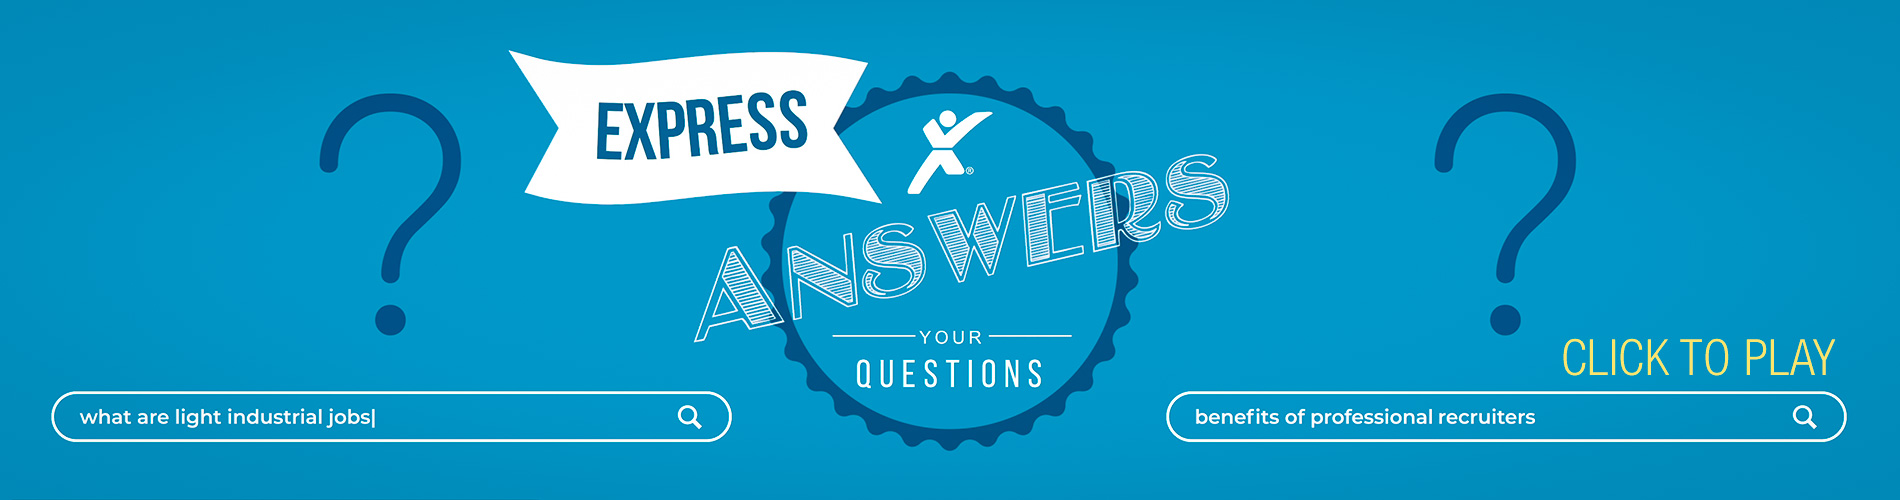 Express Answers Your Questions